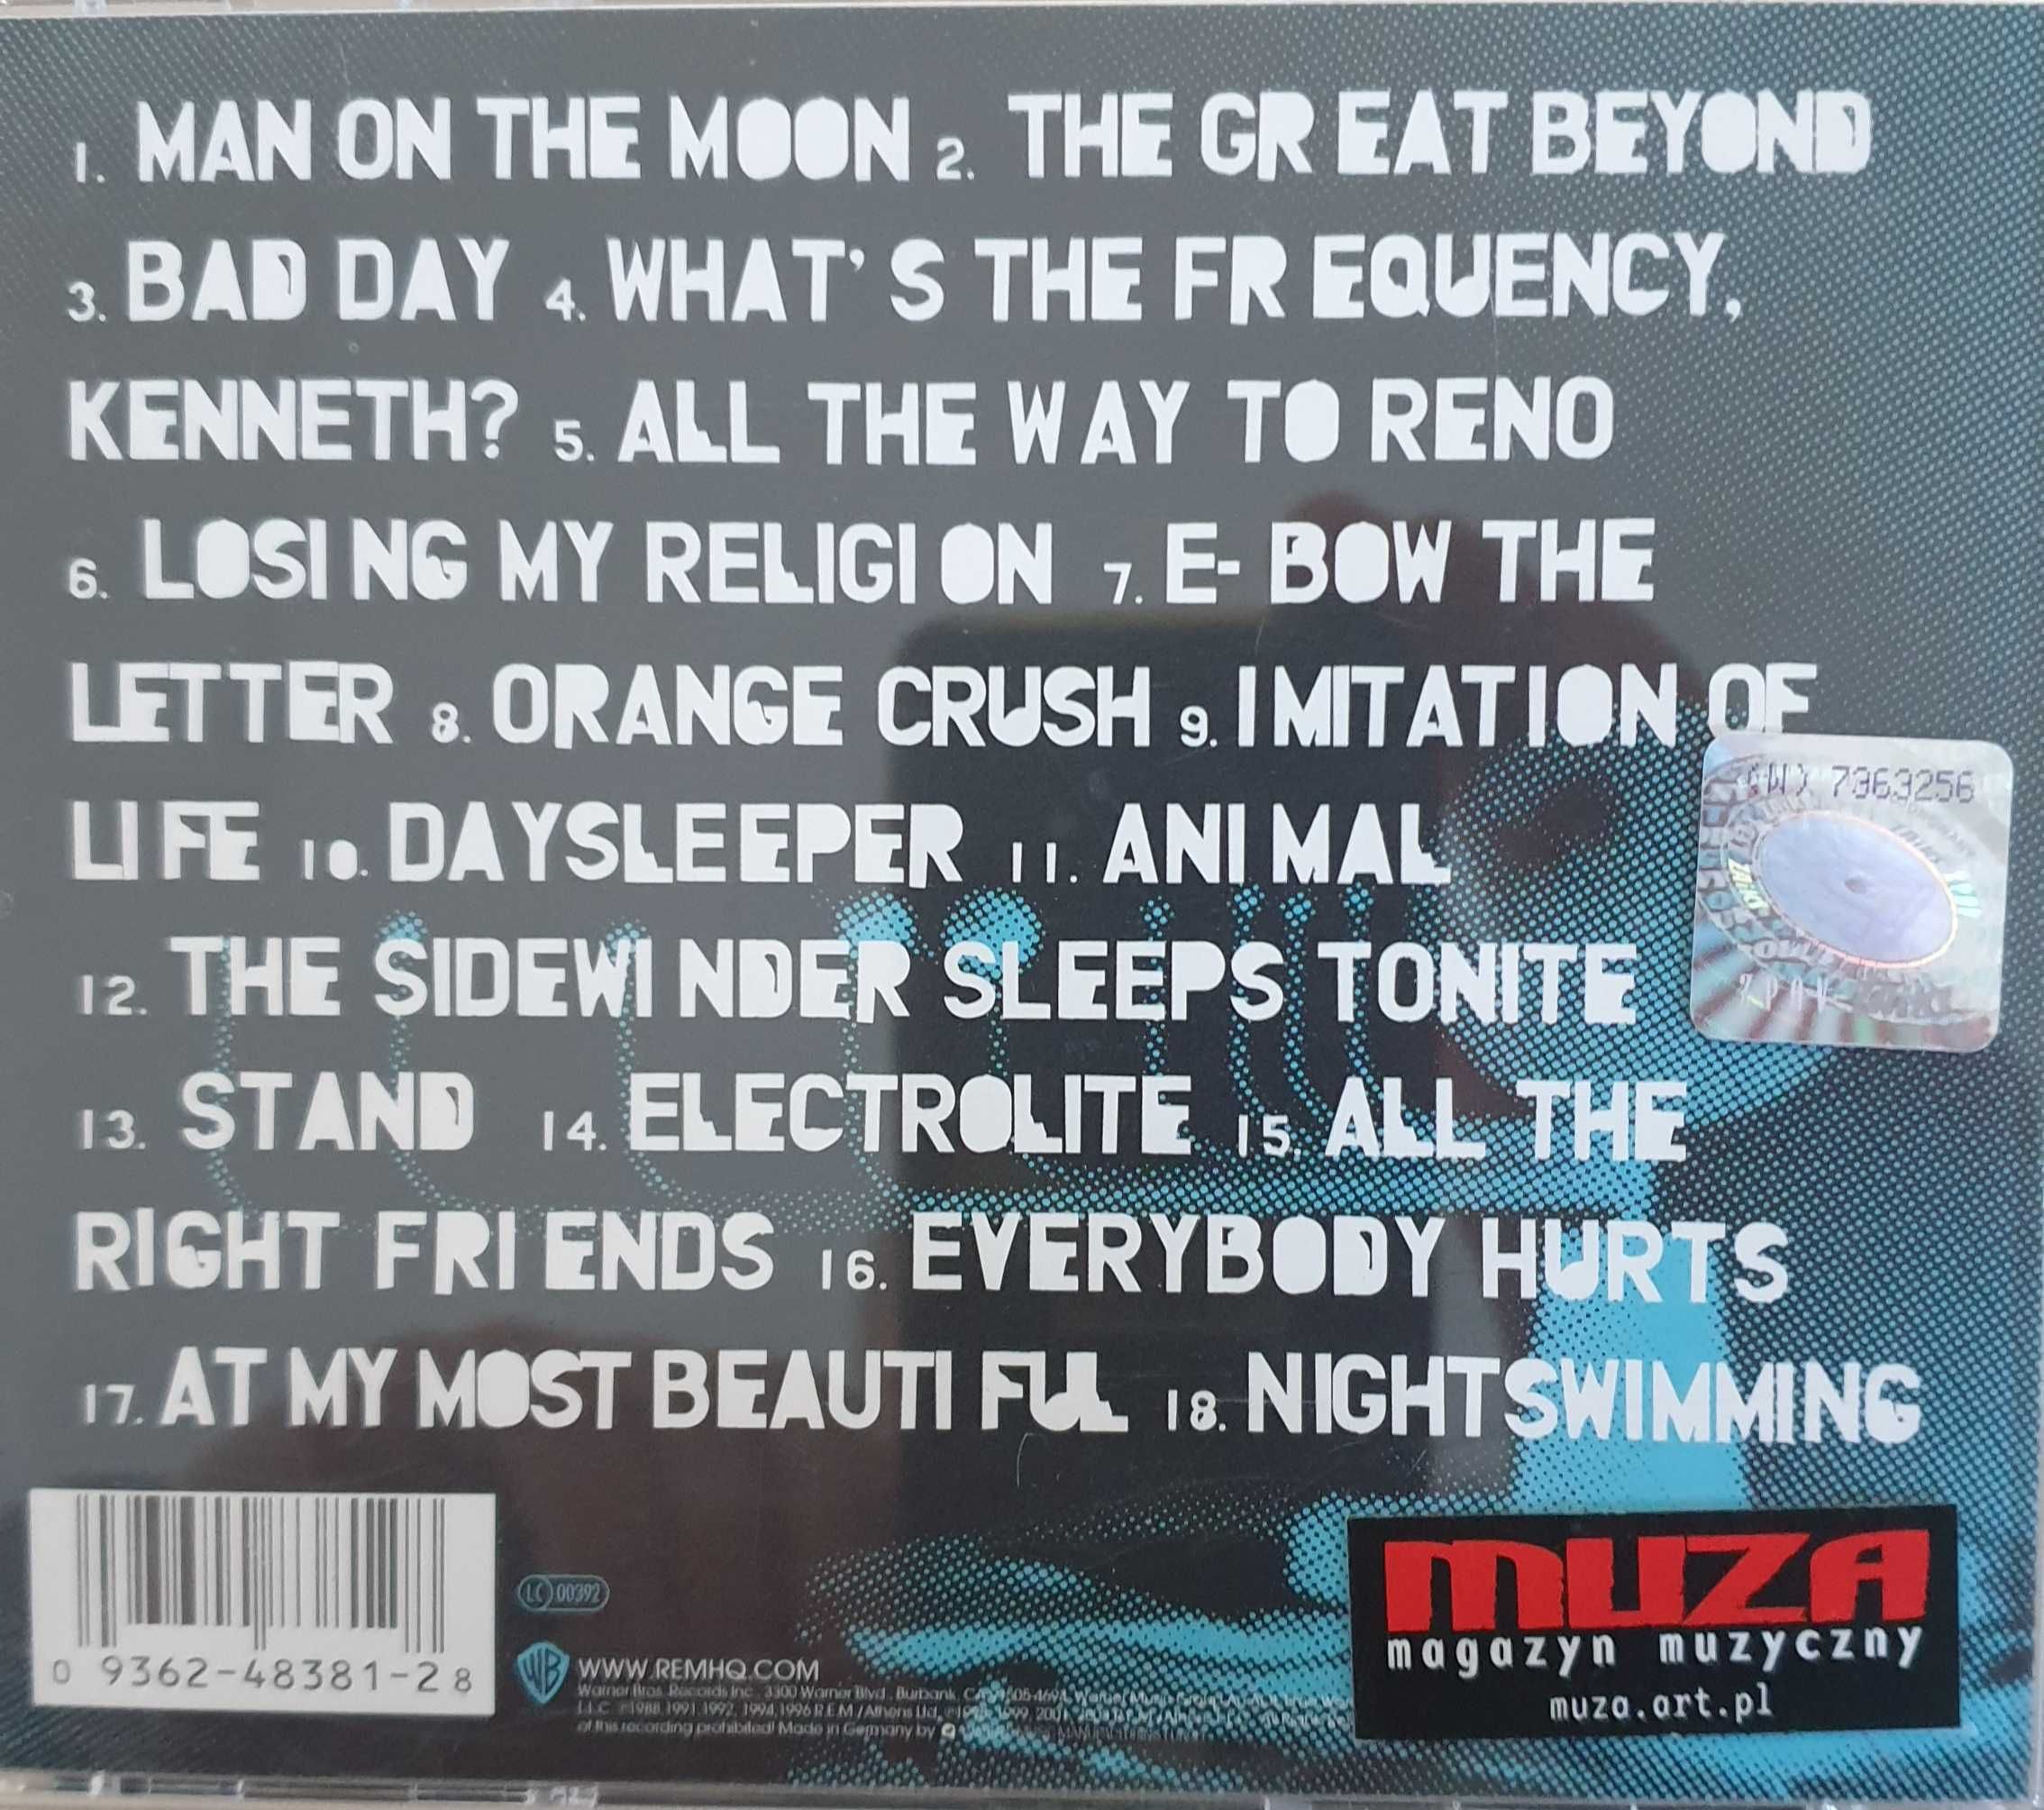 The Best of R.E.M. CD